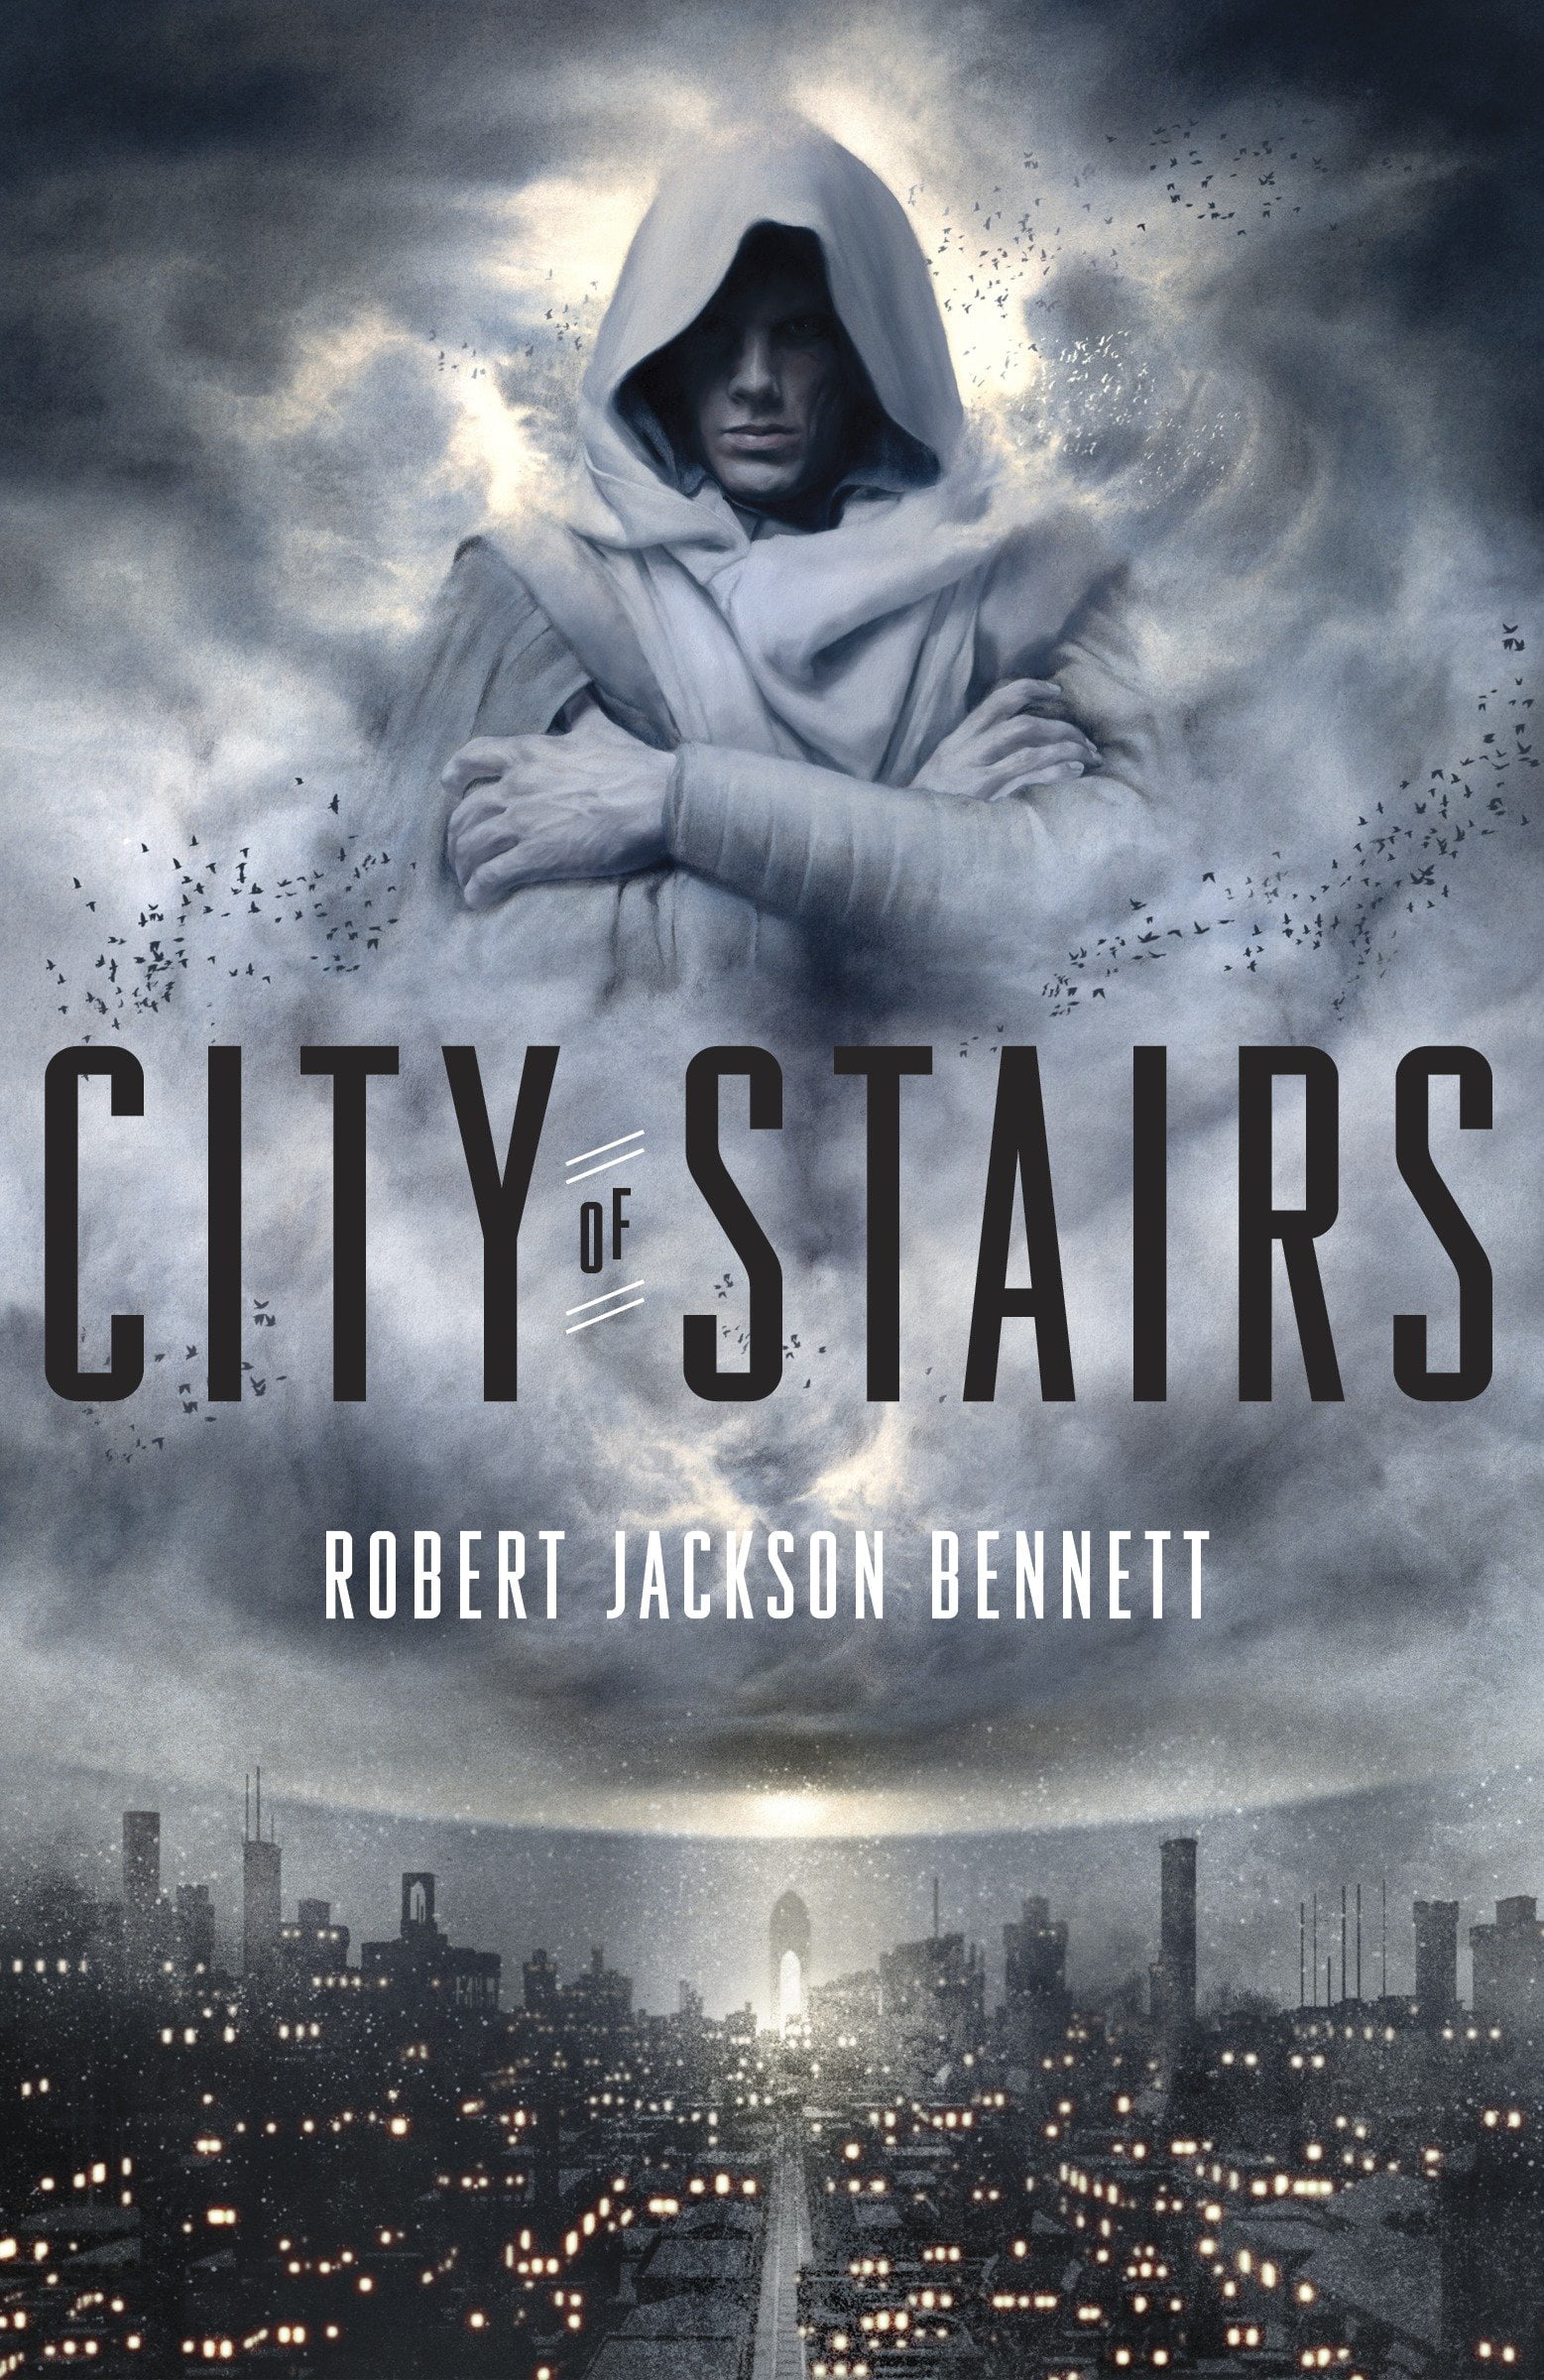 Image result for city of stairs bennett